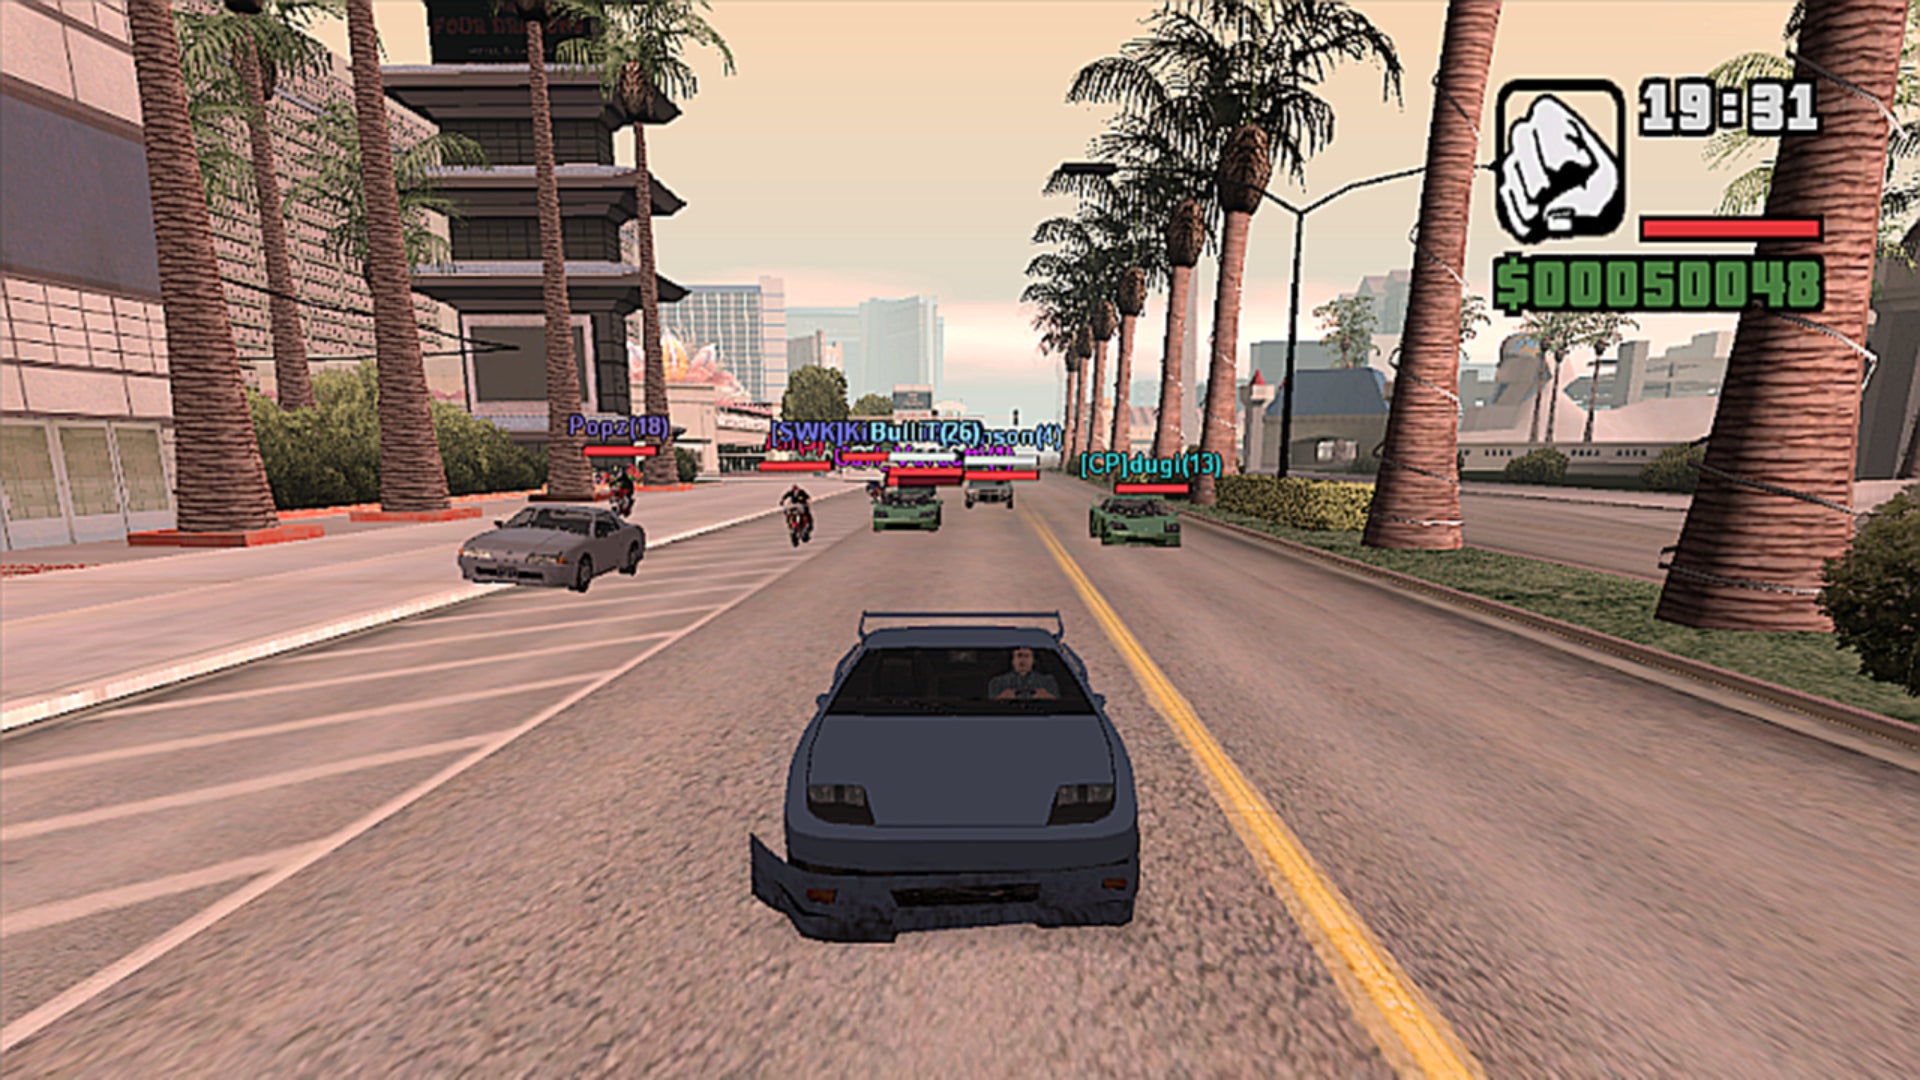 Image for GTA: San Andreas multiplayer mods continue to thrive in the age of GTA Online – but why?